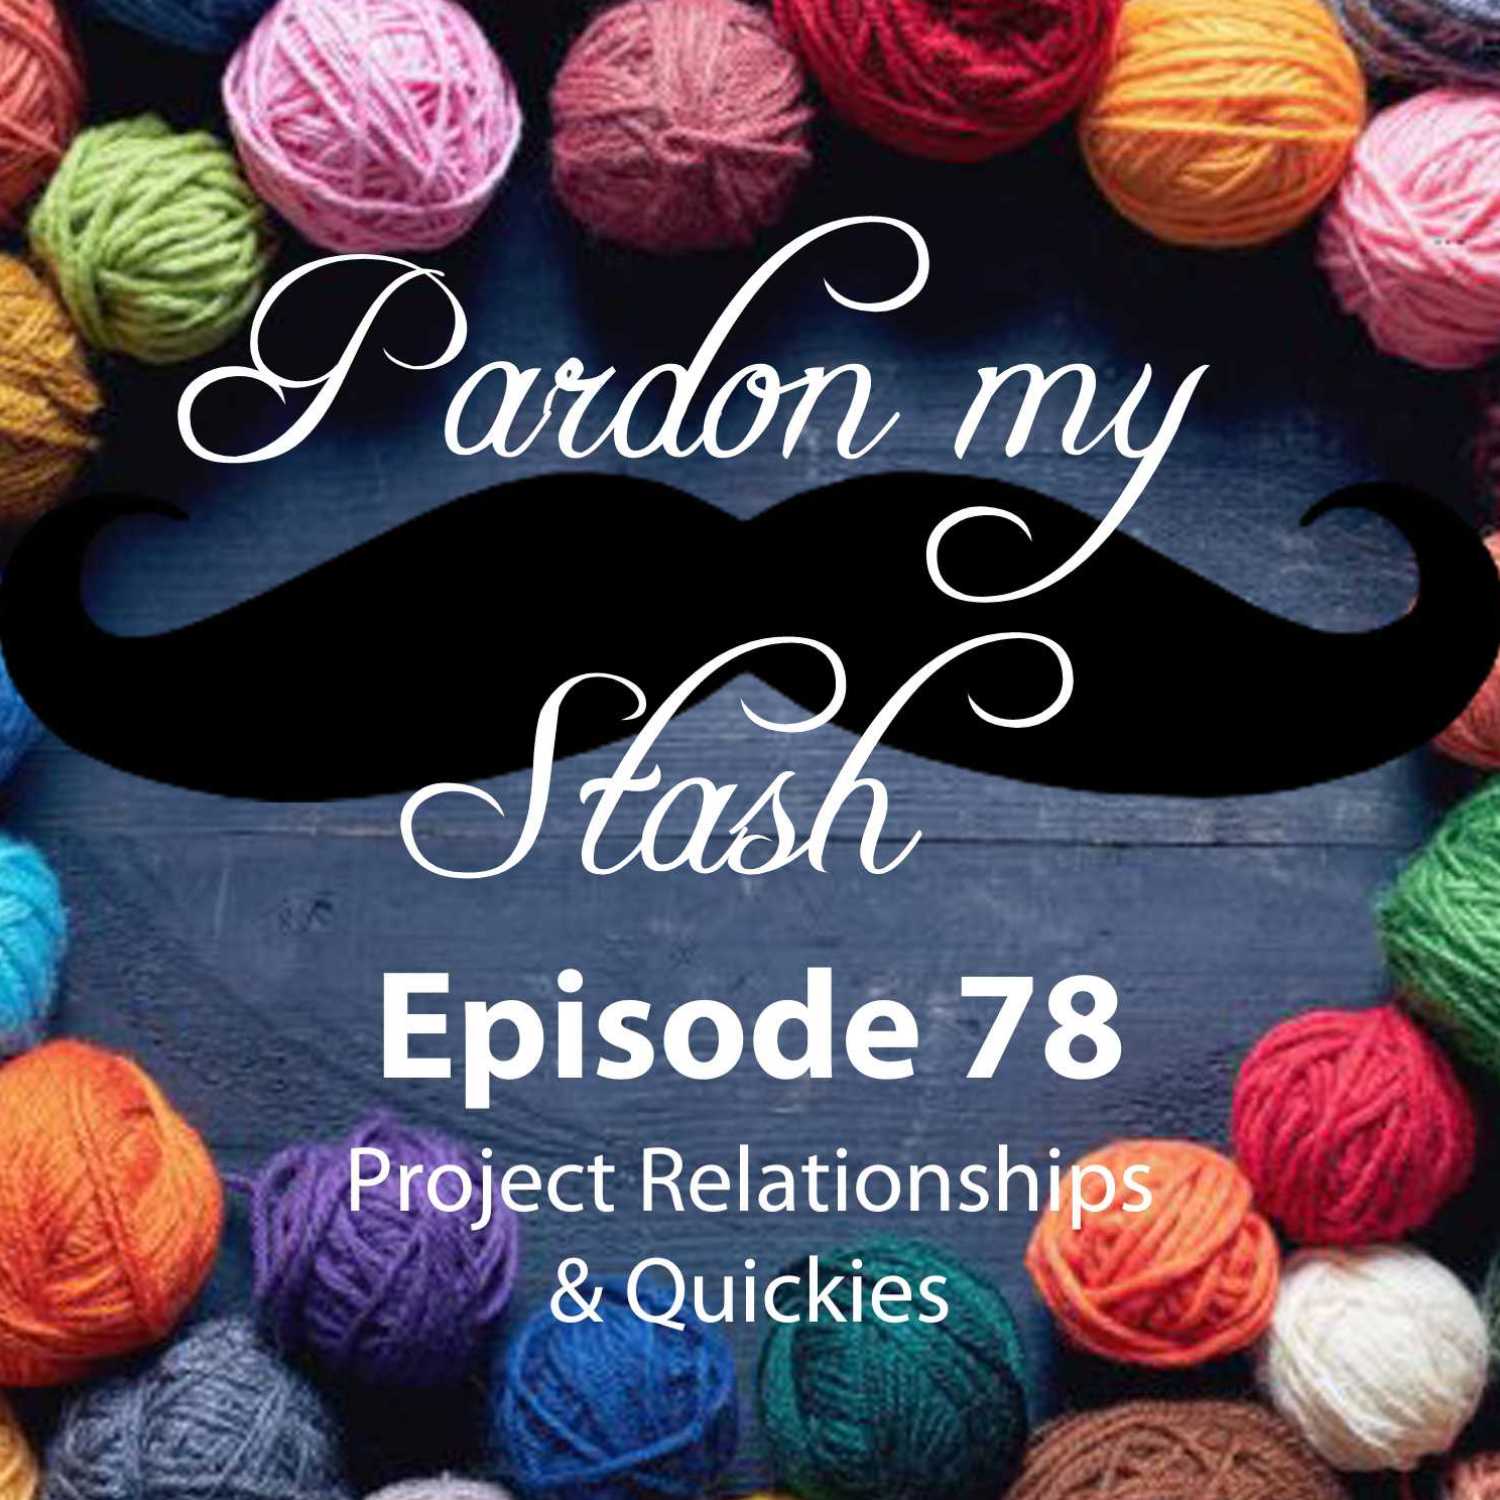 Project Relationships & Quickies